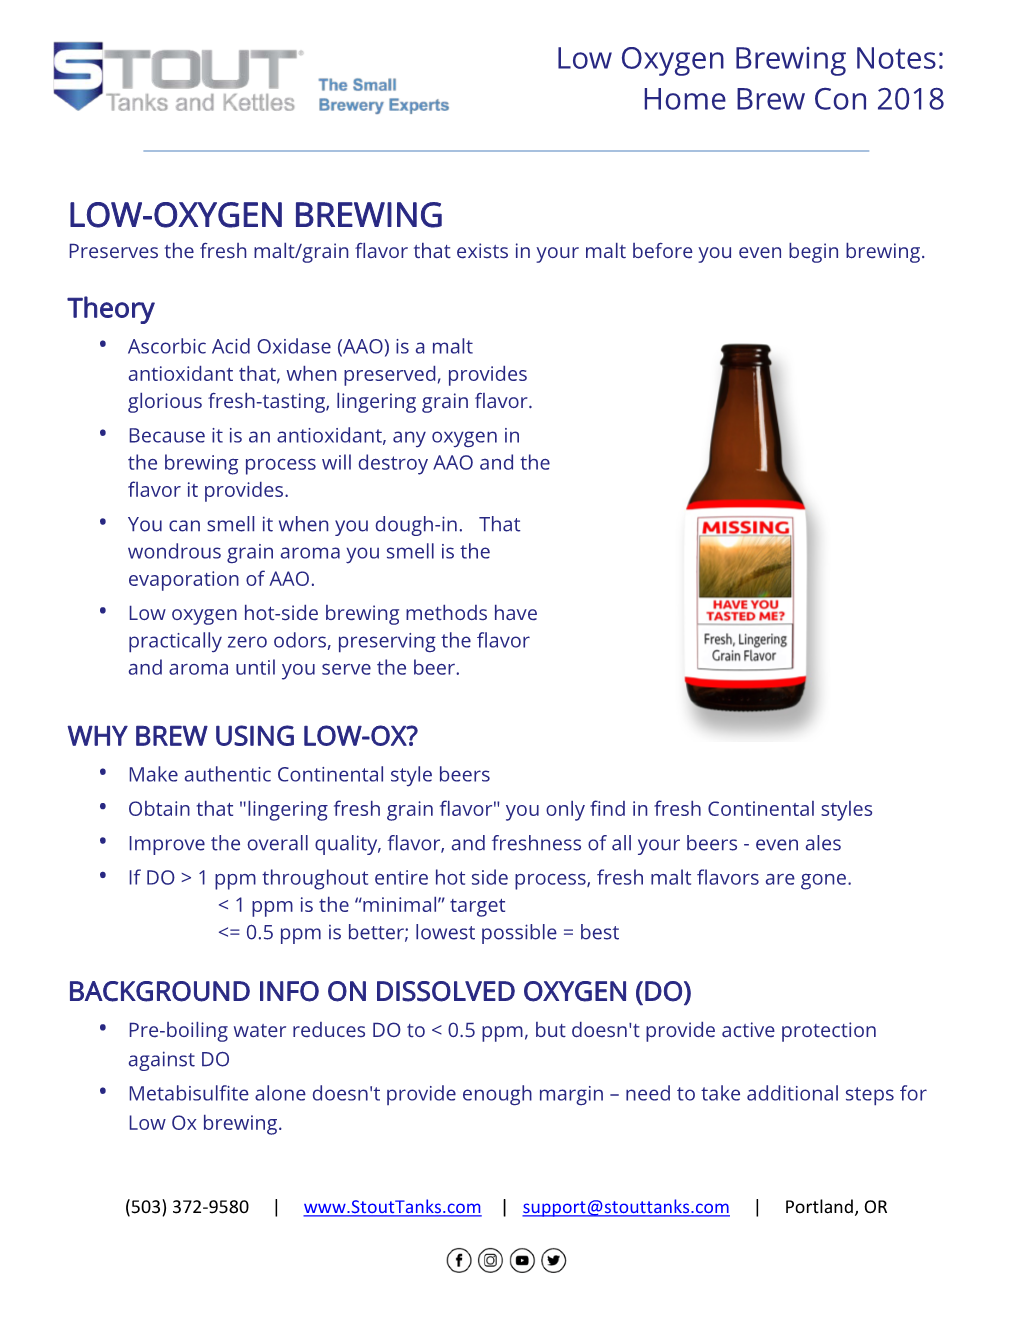 LOW-OXYGEN BREWING Preserves the Fresh Malt/Grain Flavor That Exists in Your Malt Before You Even Begin Brewing